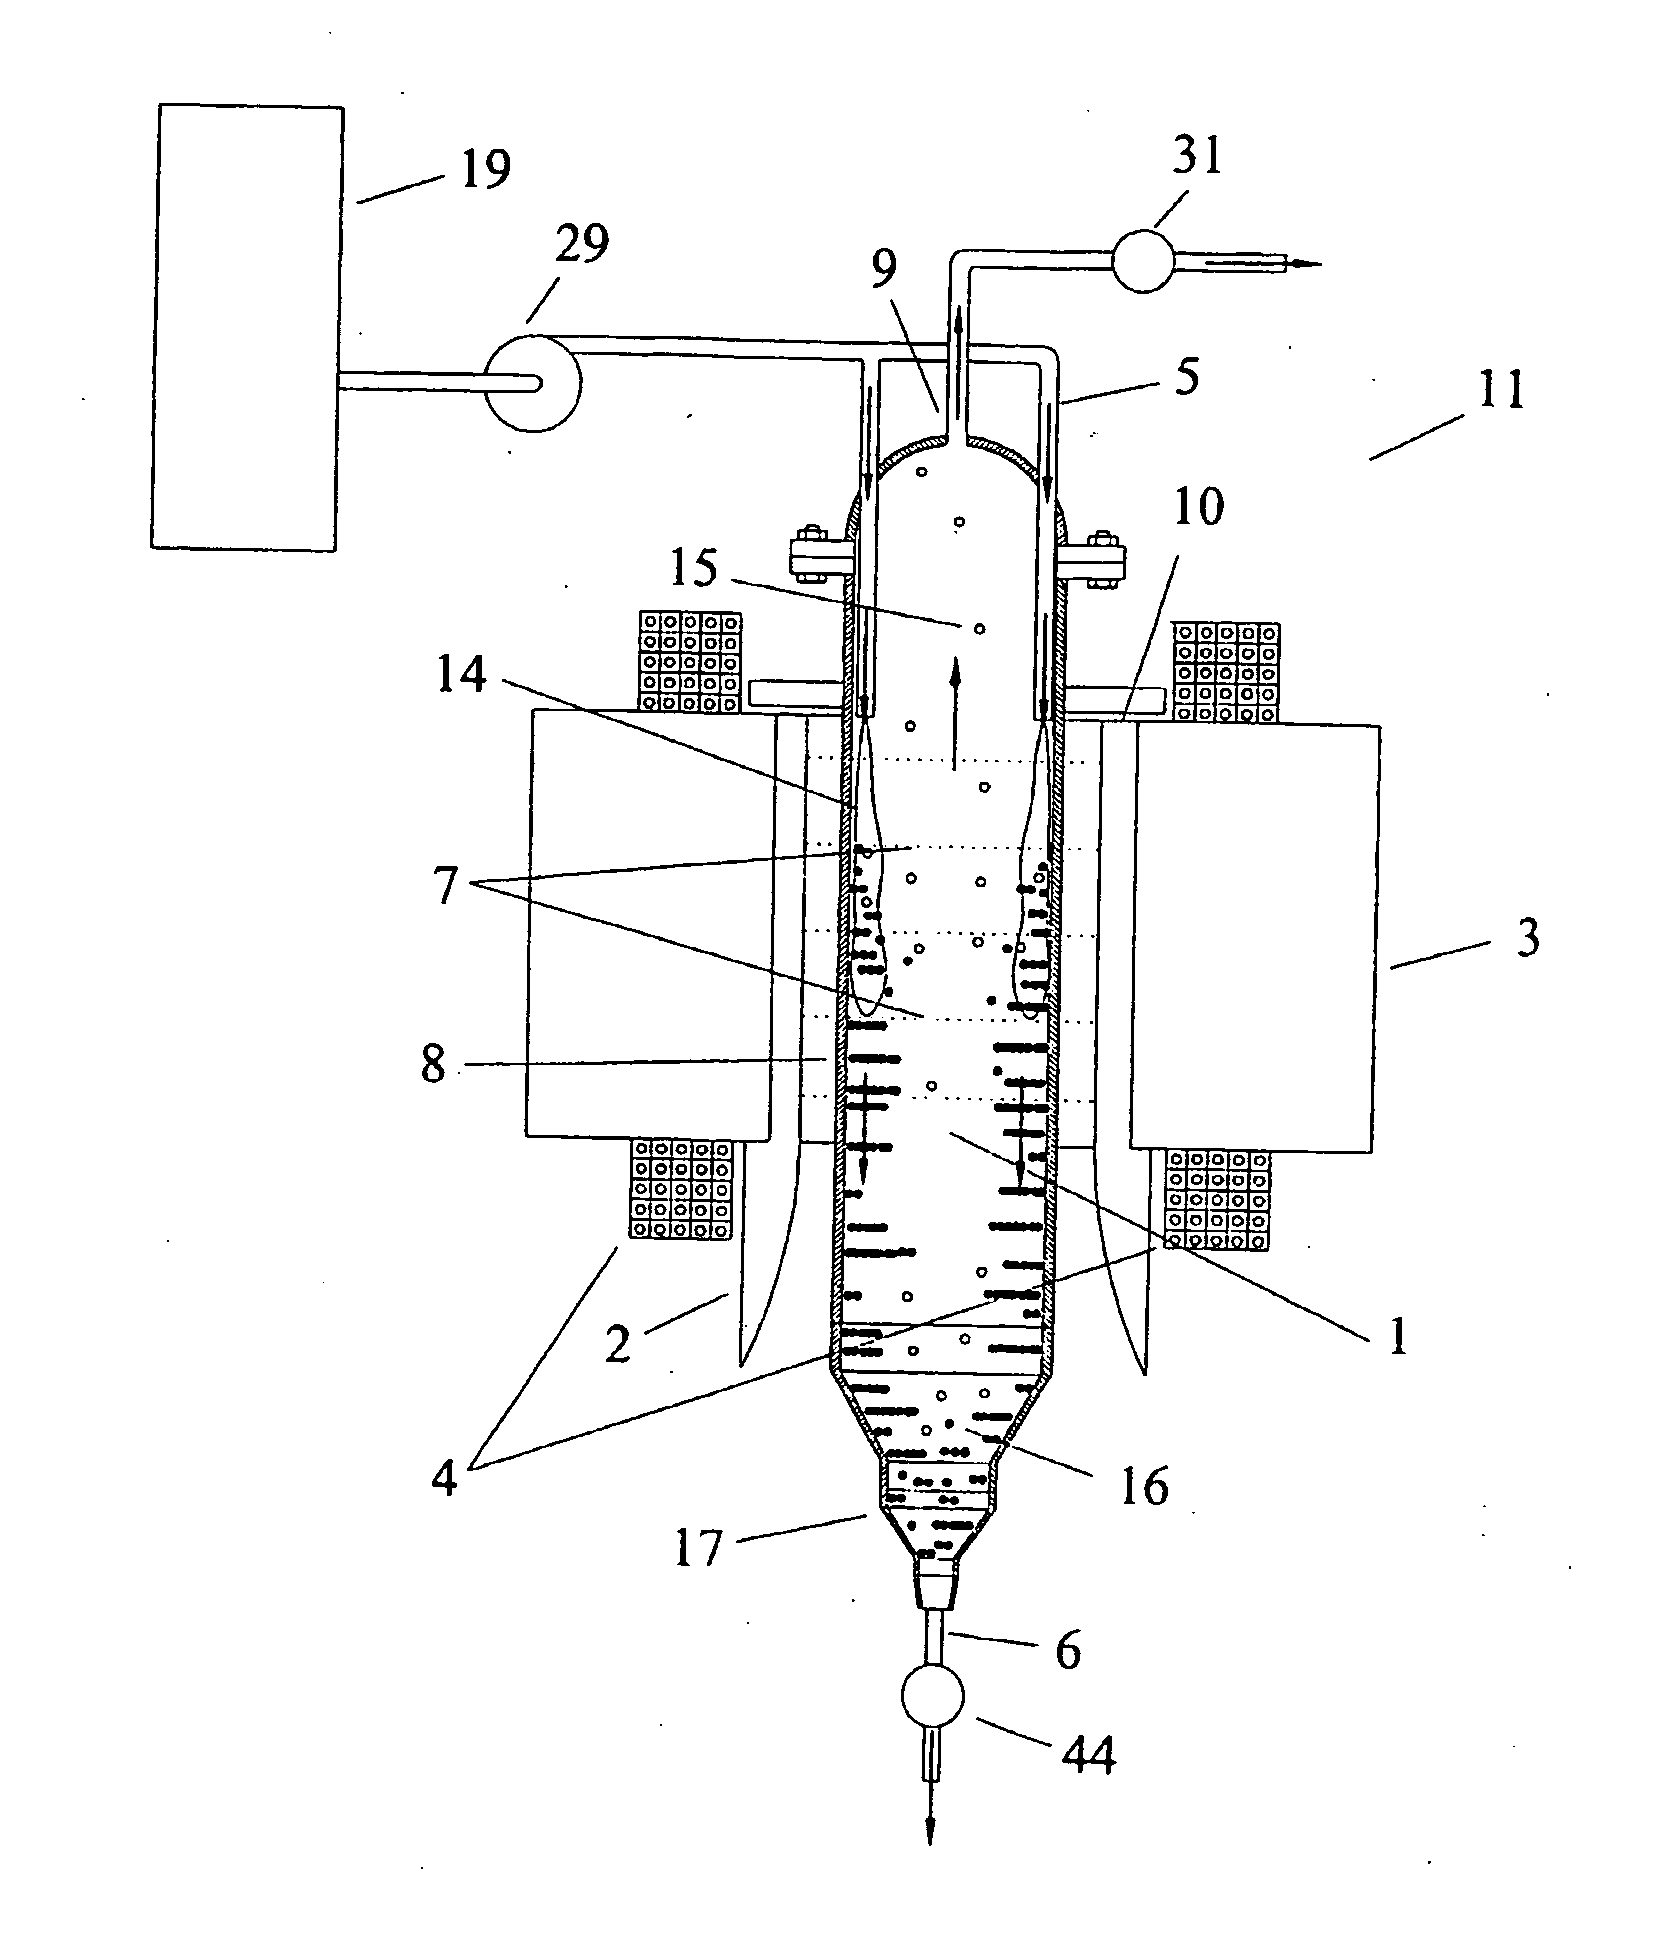 Apparatus and method for continuous separation of magnetic particles from non-magnetic fluids